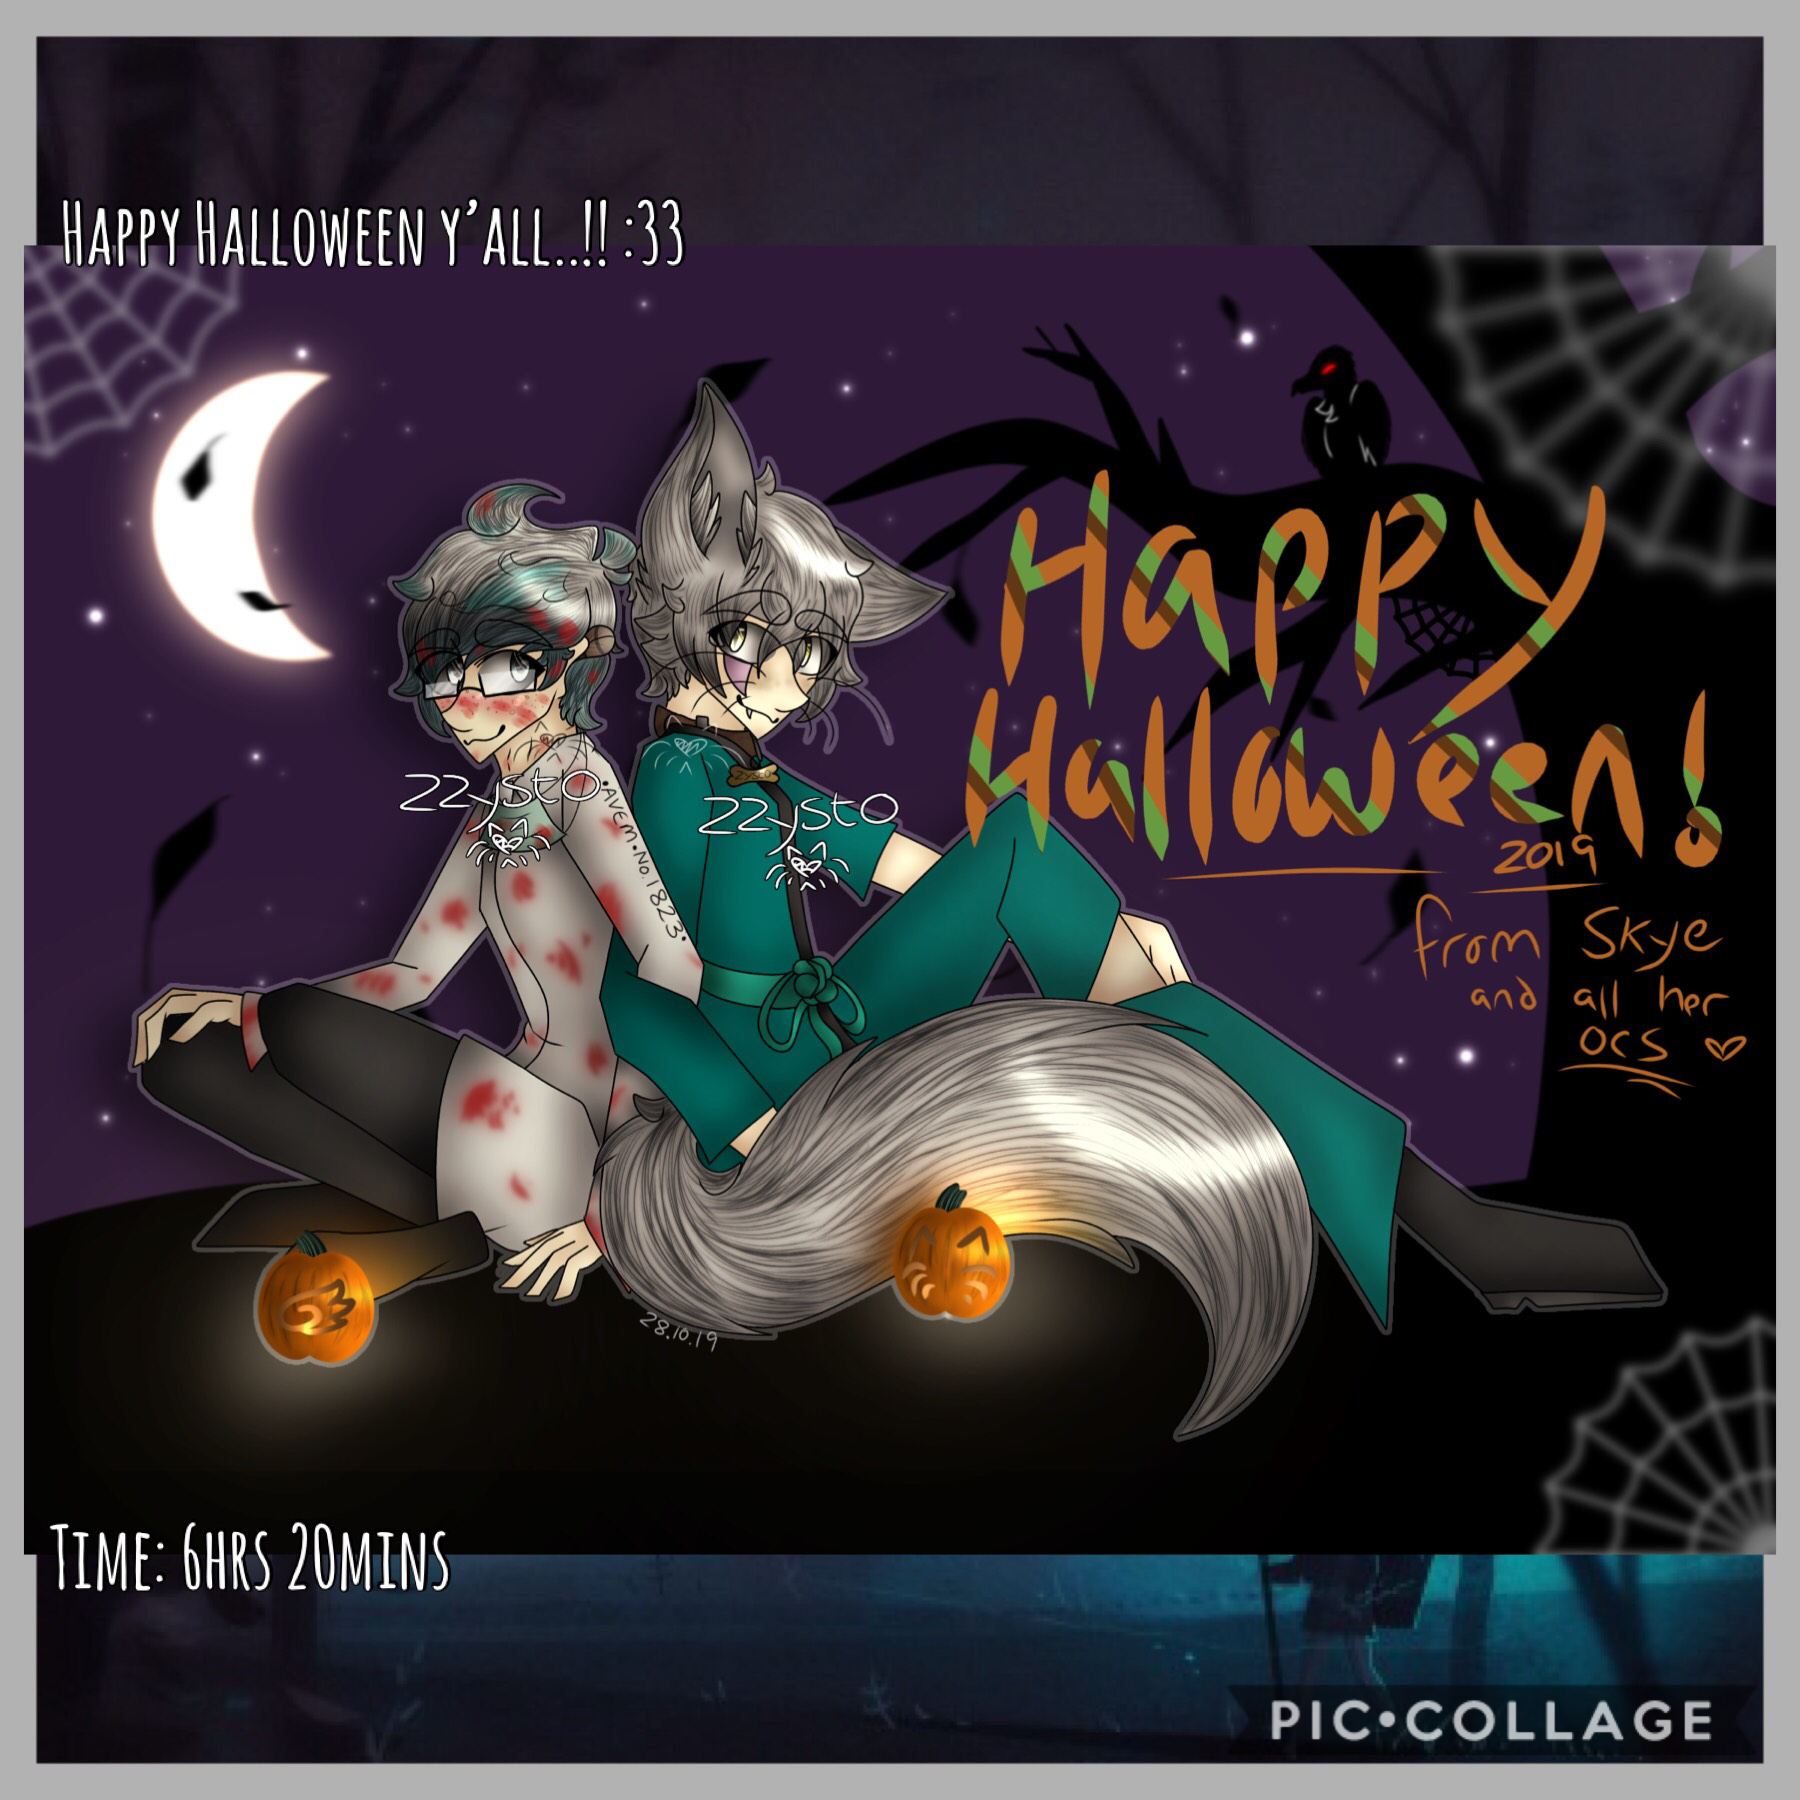 🎃🌌Tap🌌🎃
Happy Halloween..!!
Y’all better be careful when trick-or-treating, with pumpkin candles, sweets, etc ;^;
aA what are you being and/or doing for tonight? :0 I’m going to a sleepover and dressing up as Zysto :00